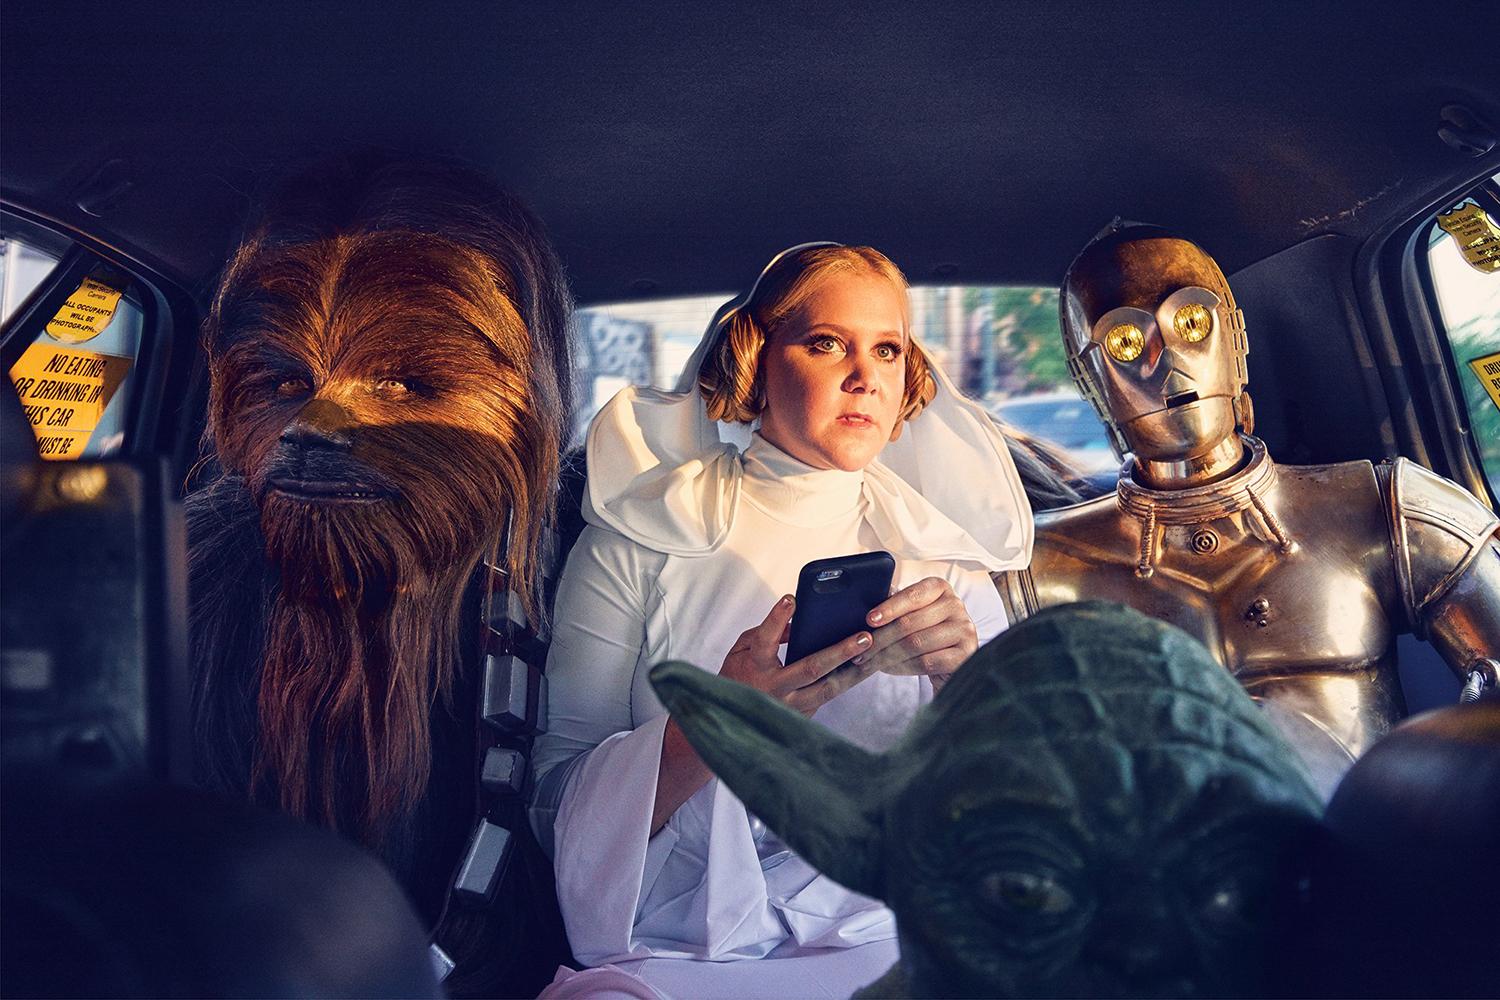 amy schumer risque star wars photo shoot gq is the funniest woman in galaxy  mark seliger 05